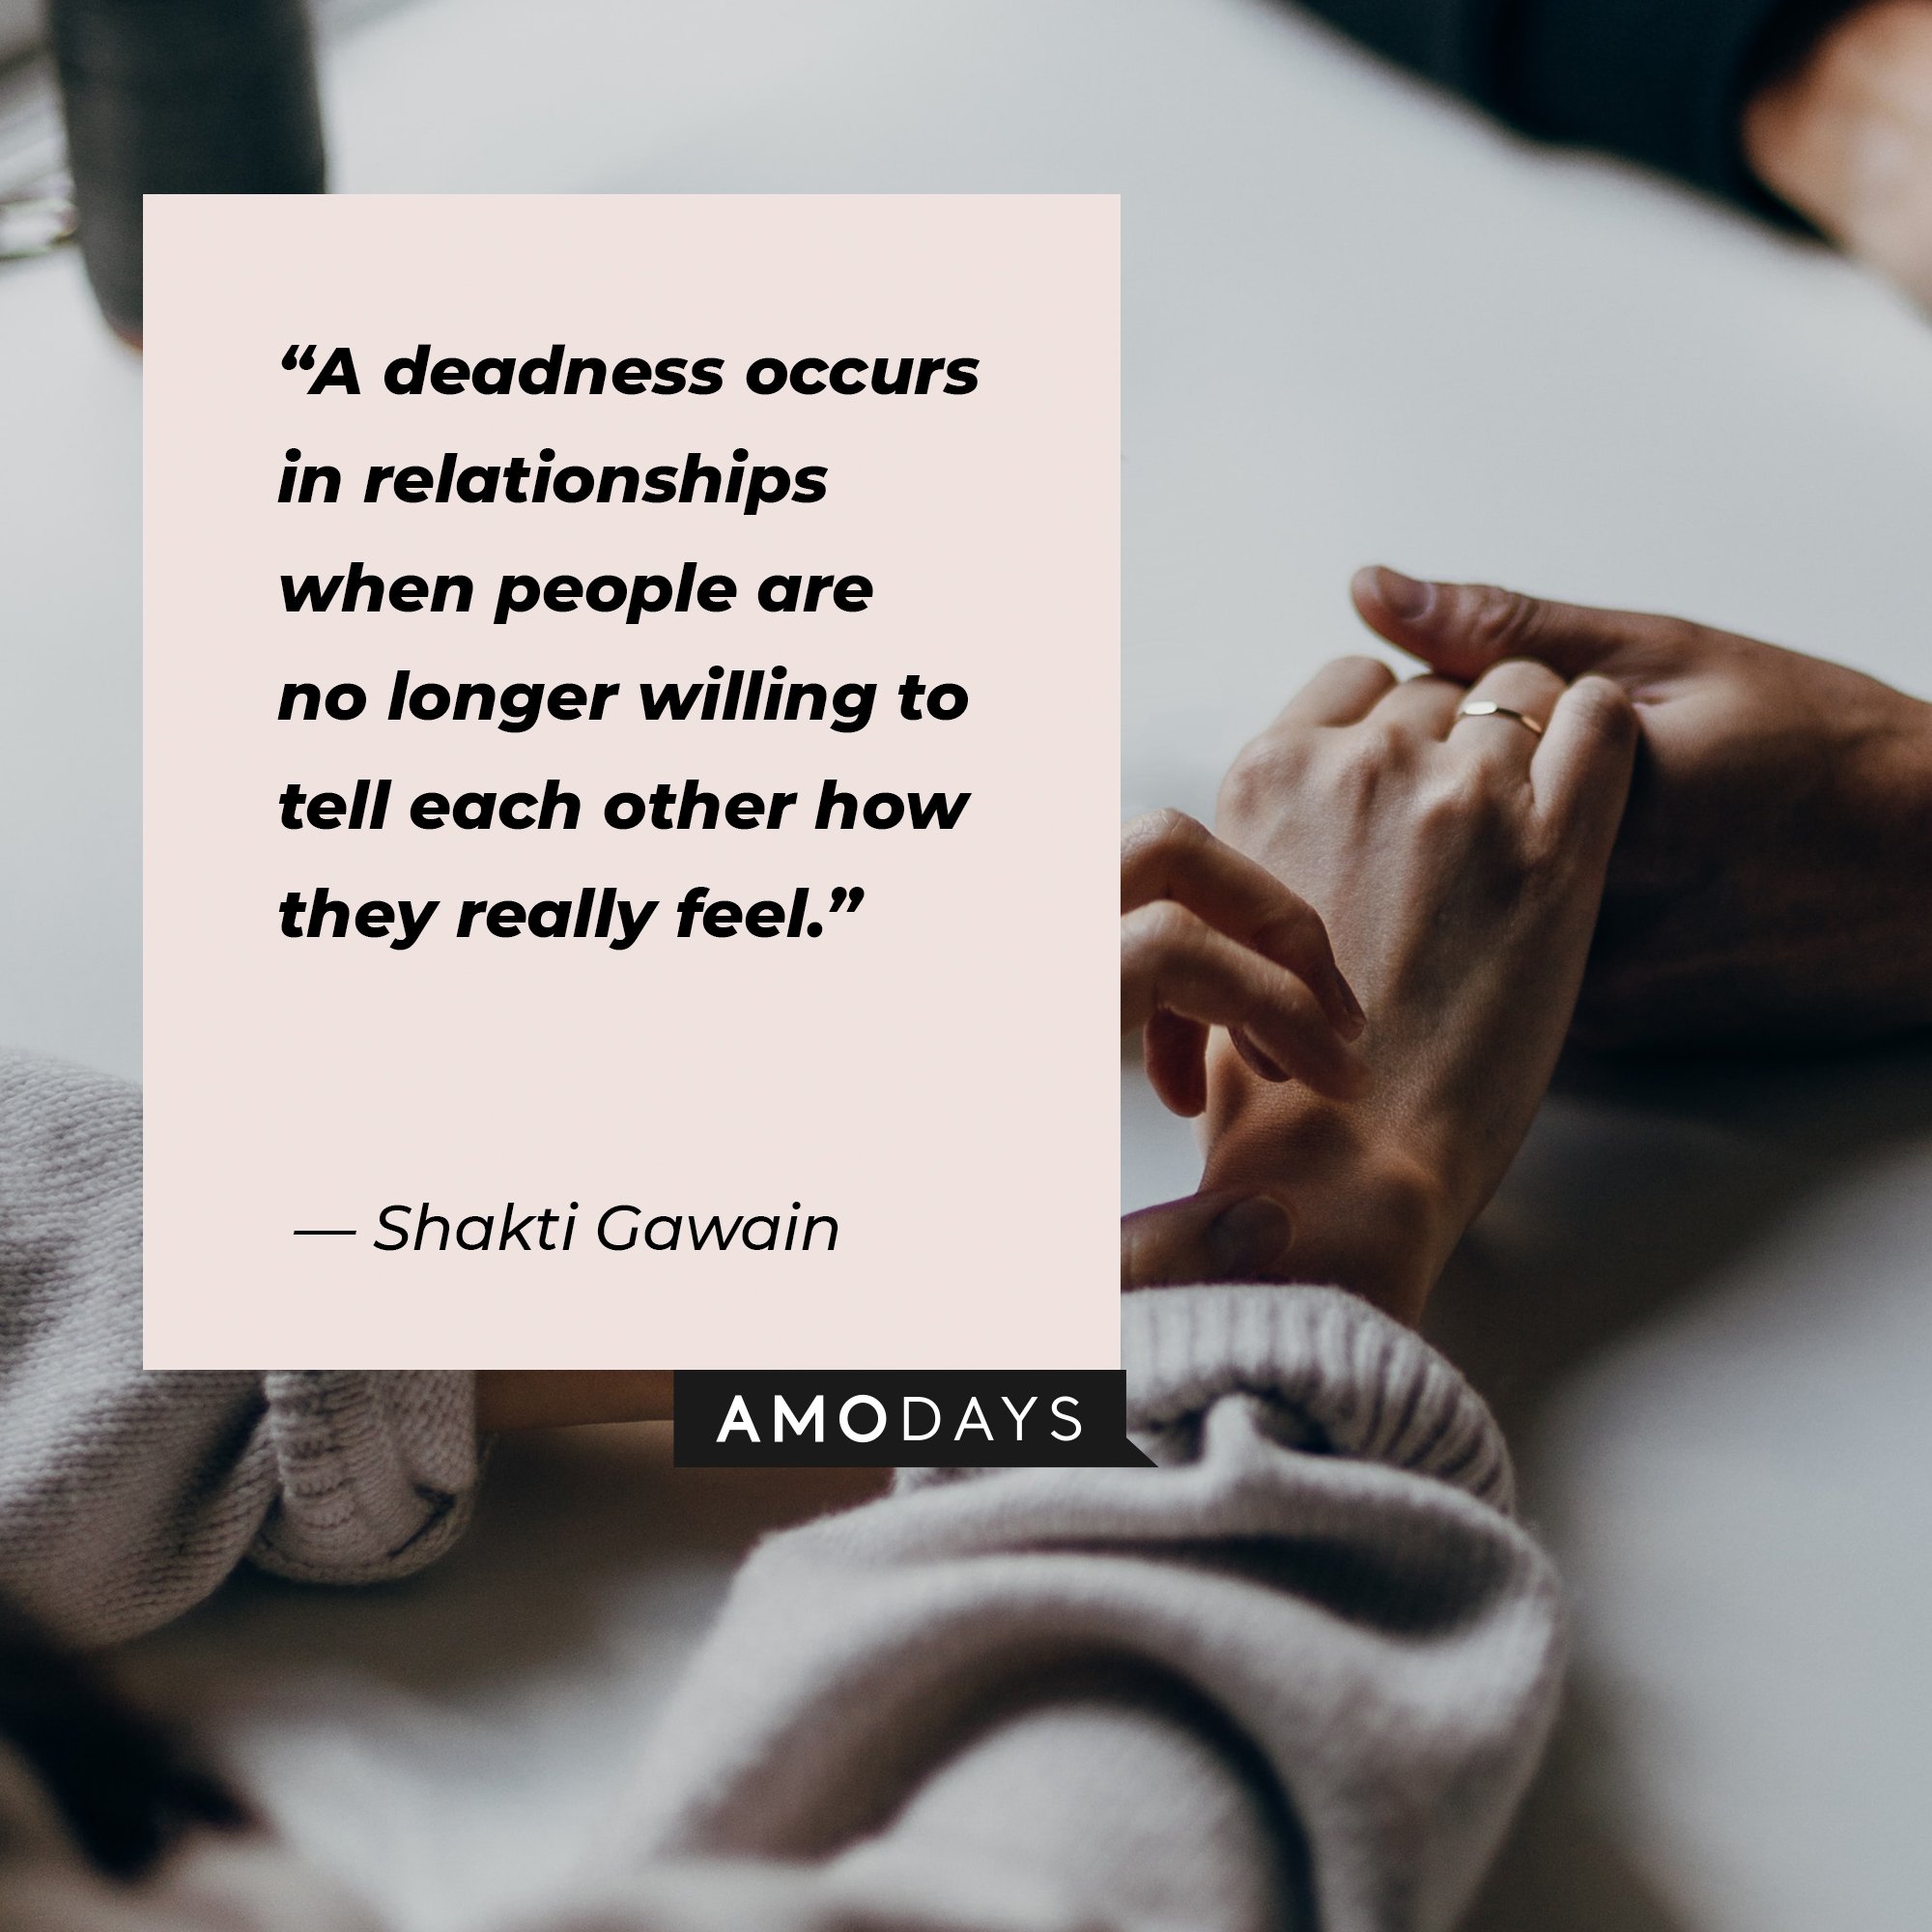 Shakti Gawain’s quote: “A deadness occurs in relationships when people are no longer willing to tell each other how they really feel.” | Image: AmoDays